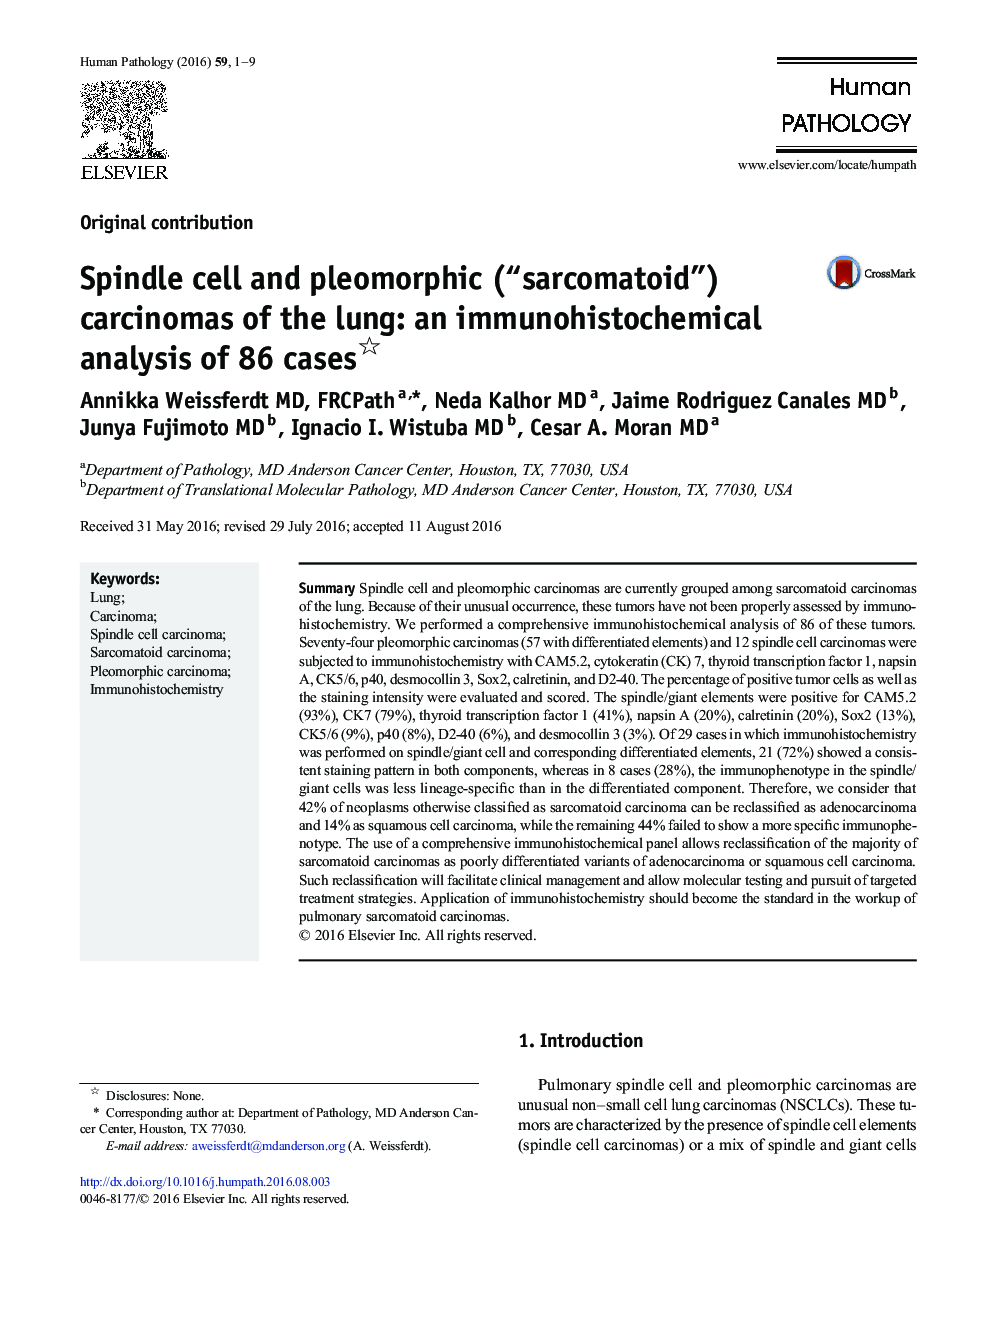 Spindle cell and pleomorphic (“sarcomatoid”) carcinomas of the lung: an immunohistochemical analysis of 86 cases 